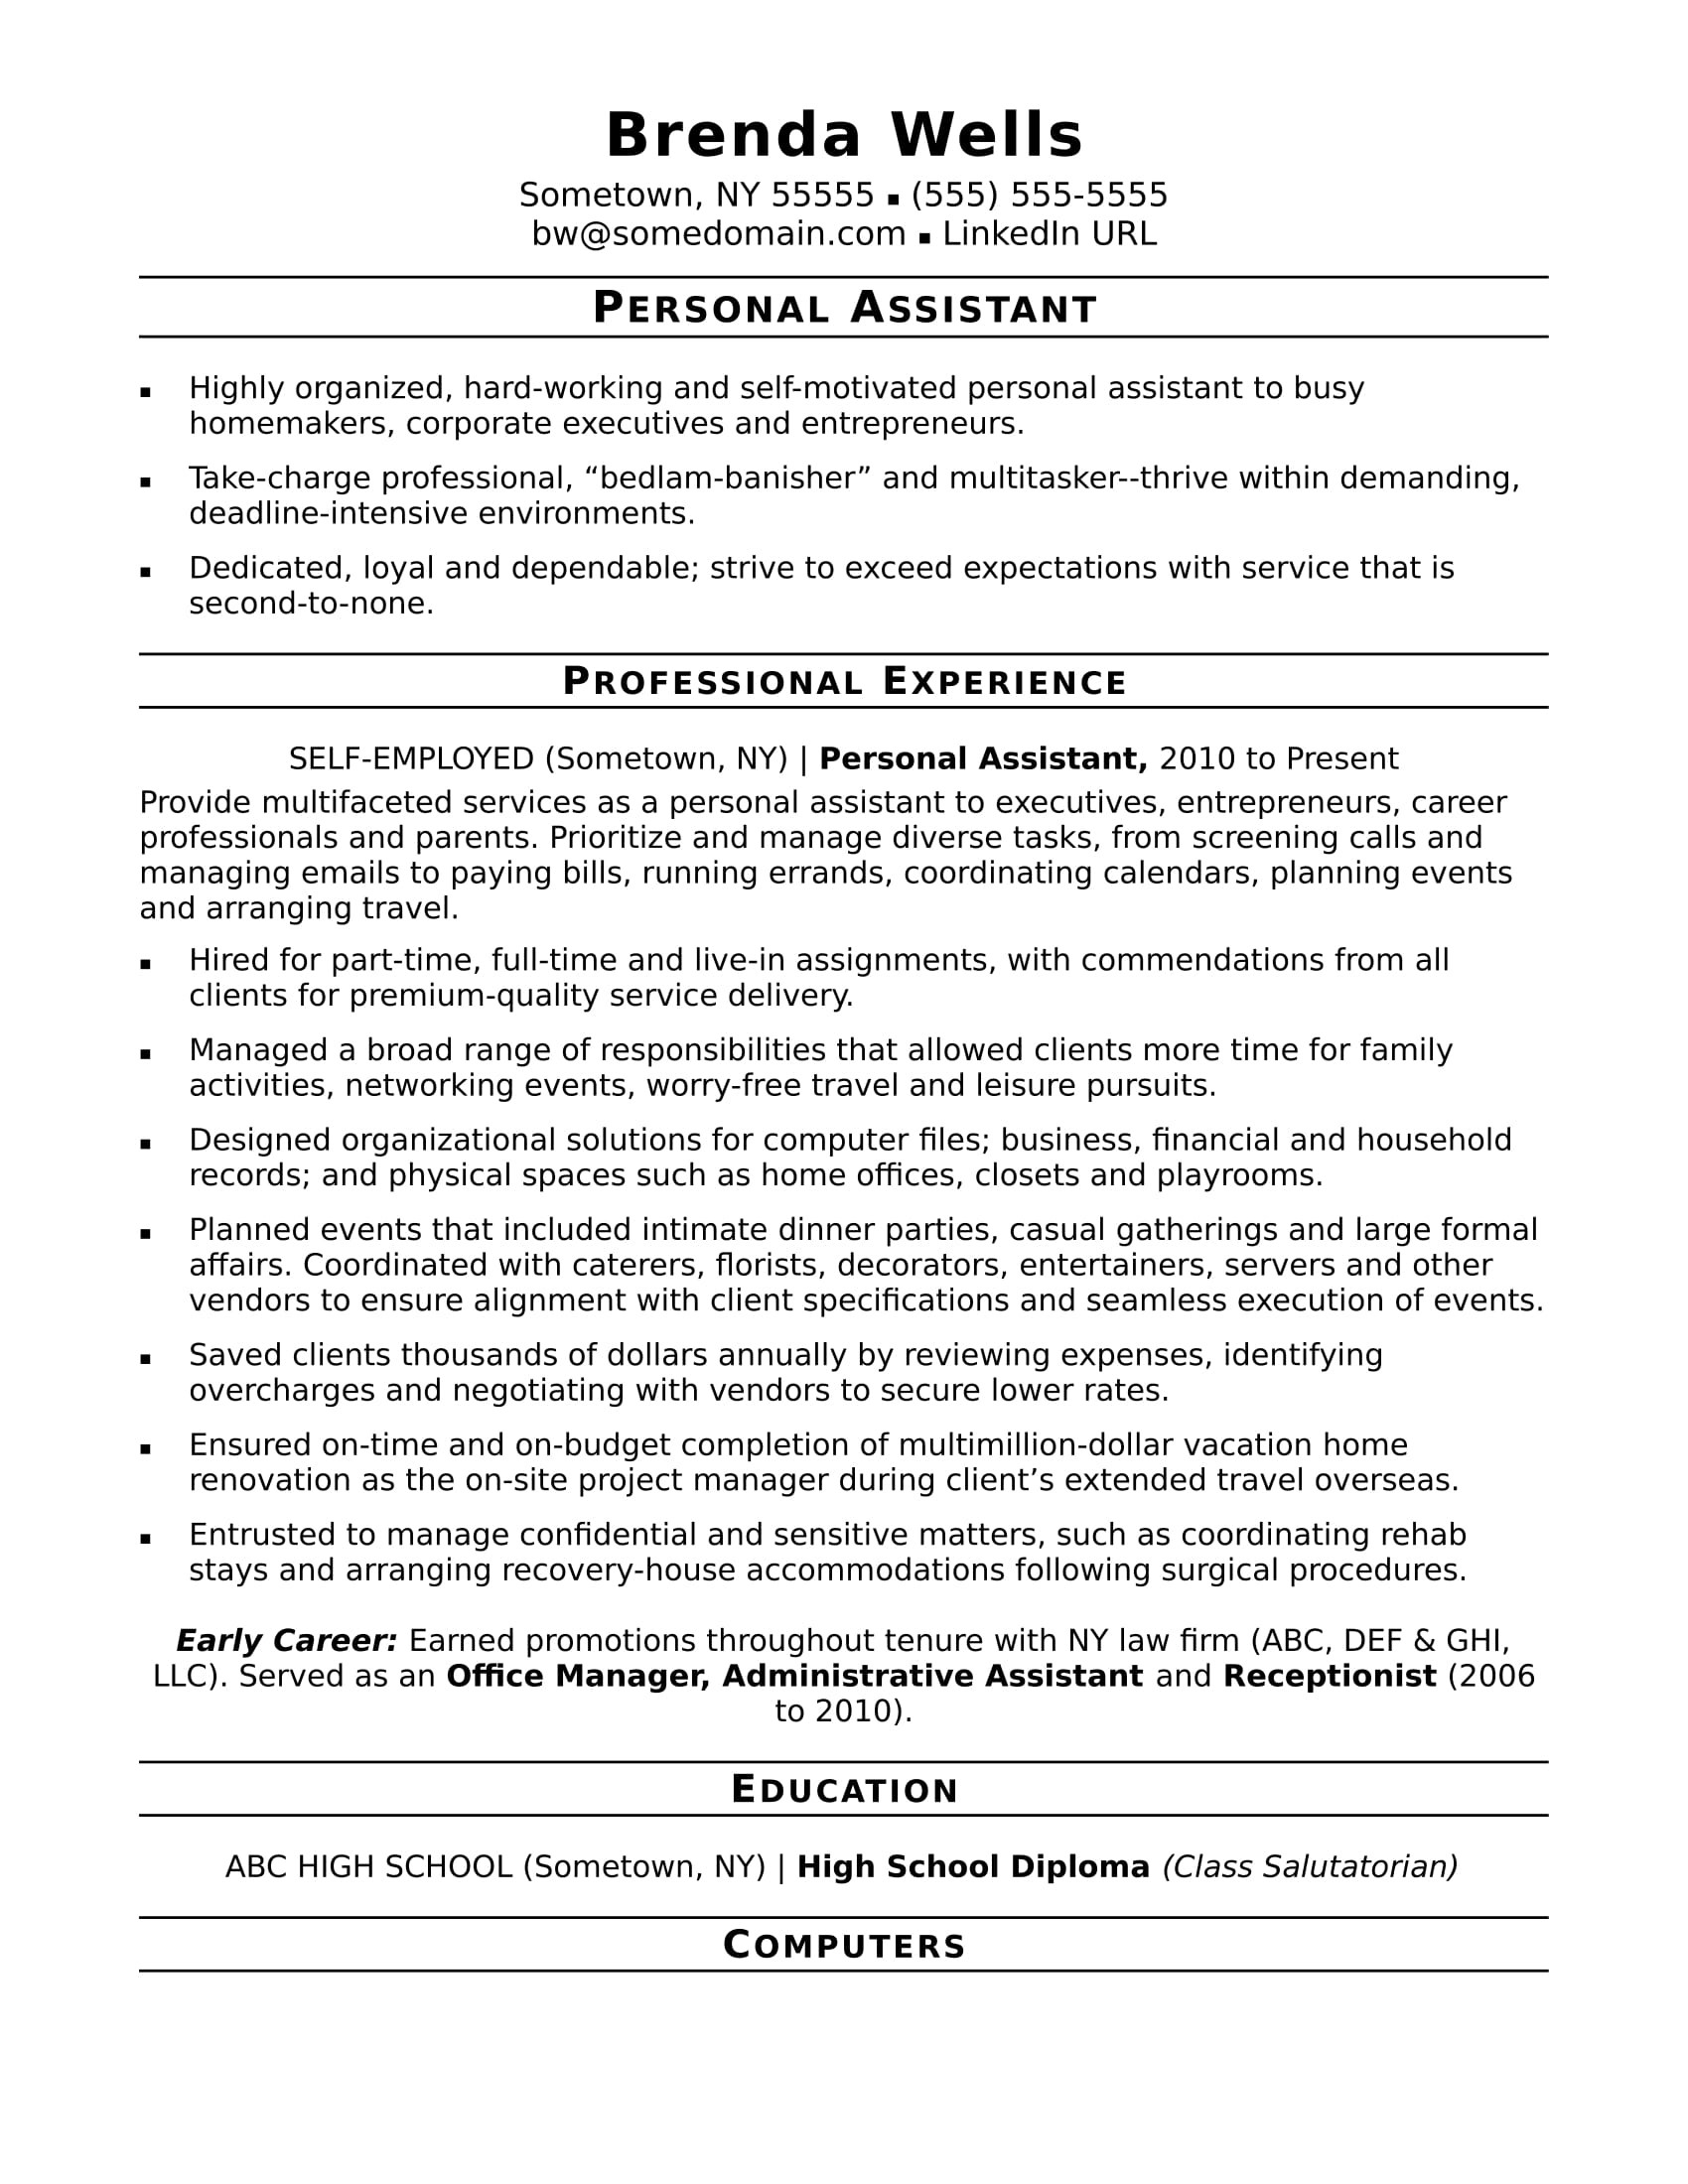 Sample Resume for Promotion within Same Company Personal assistant Resume Sample Monster.com